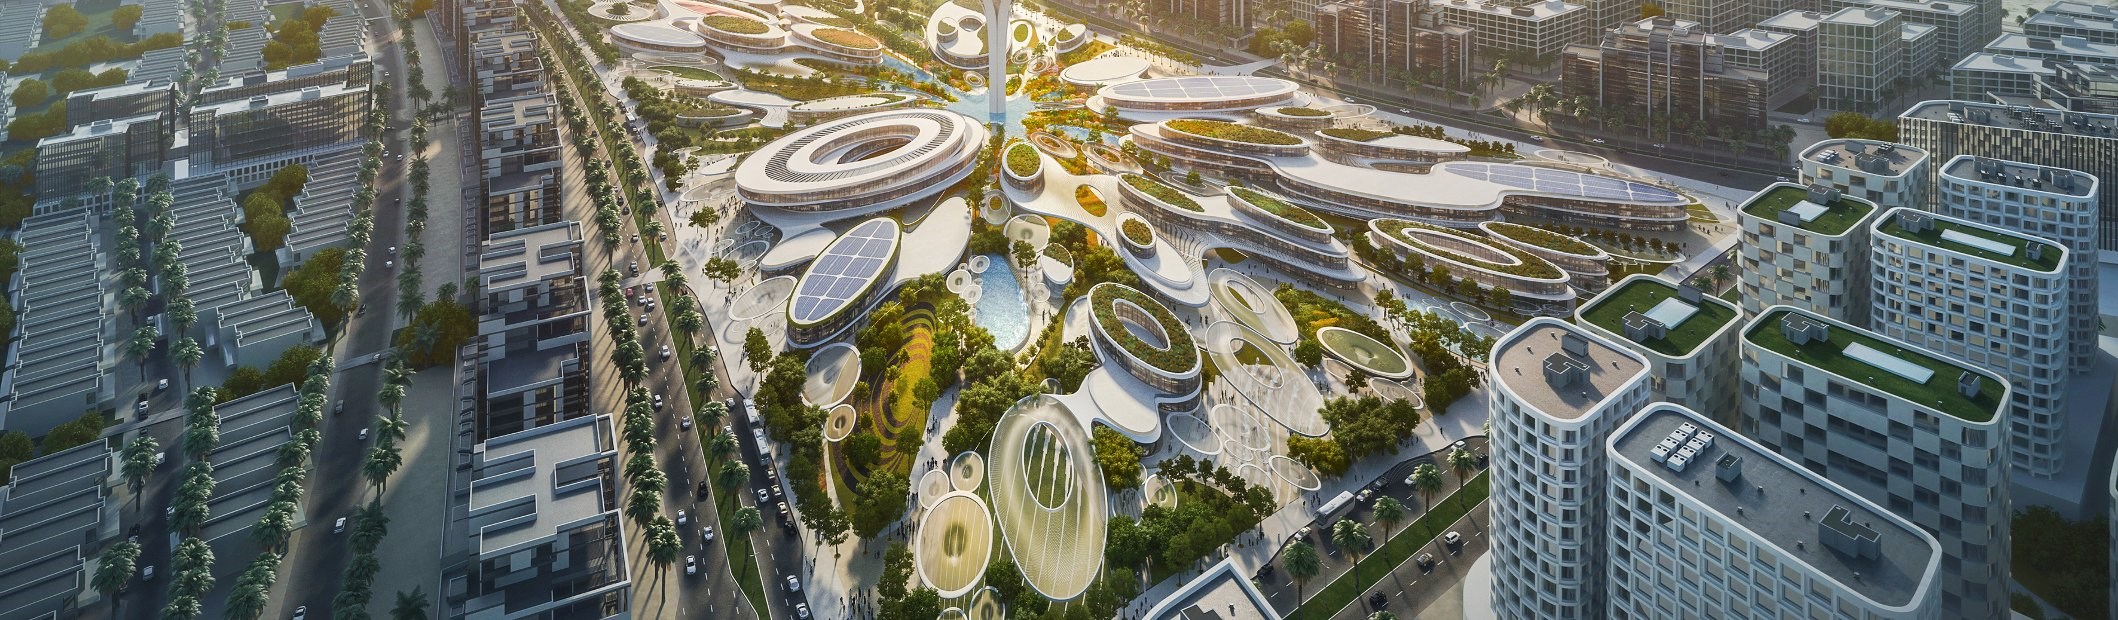 News Atlas: Zaha Hadid Architects to forge water-droplet-shaped complex in UAE